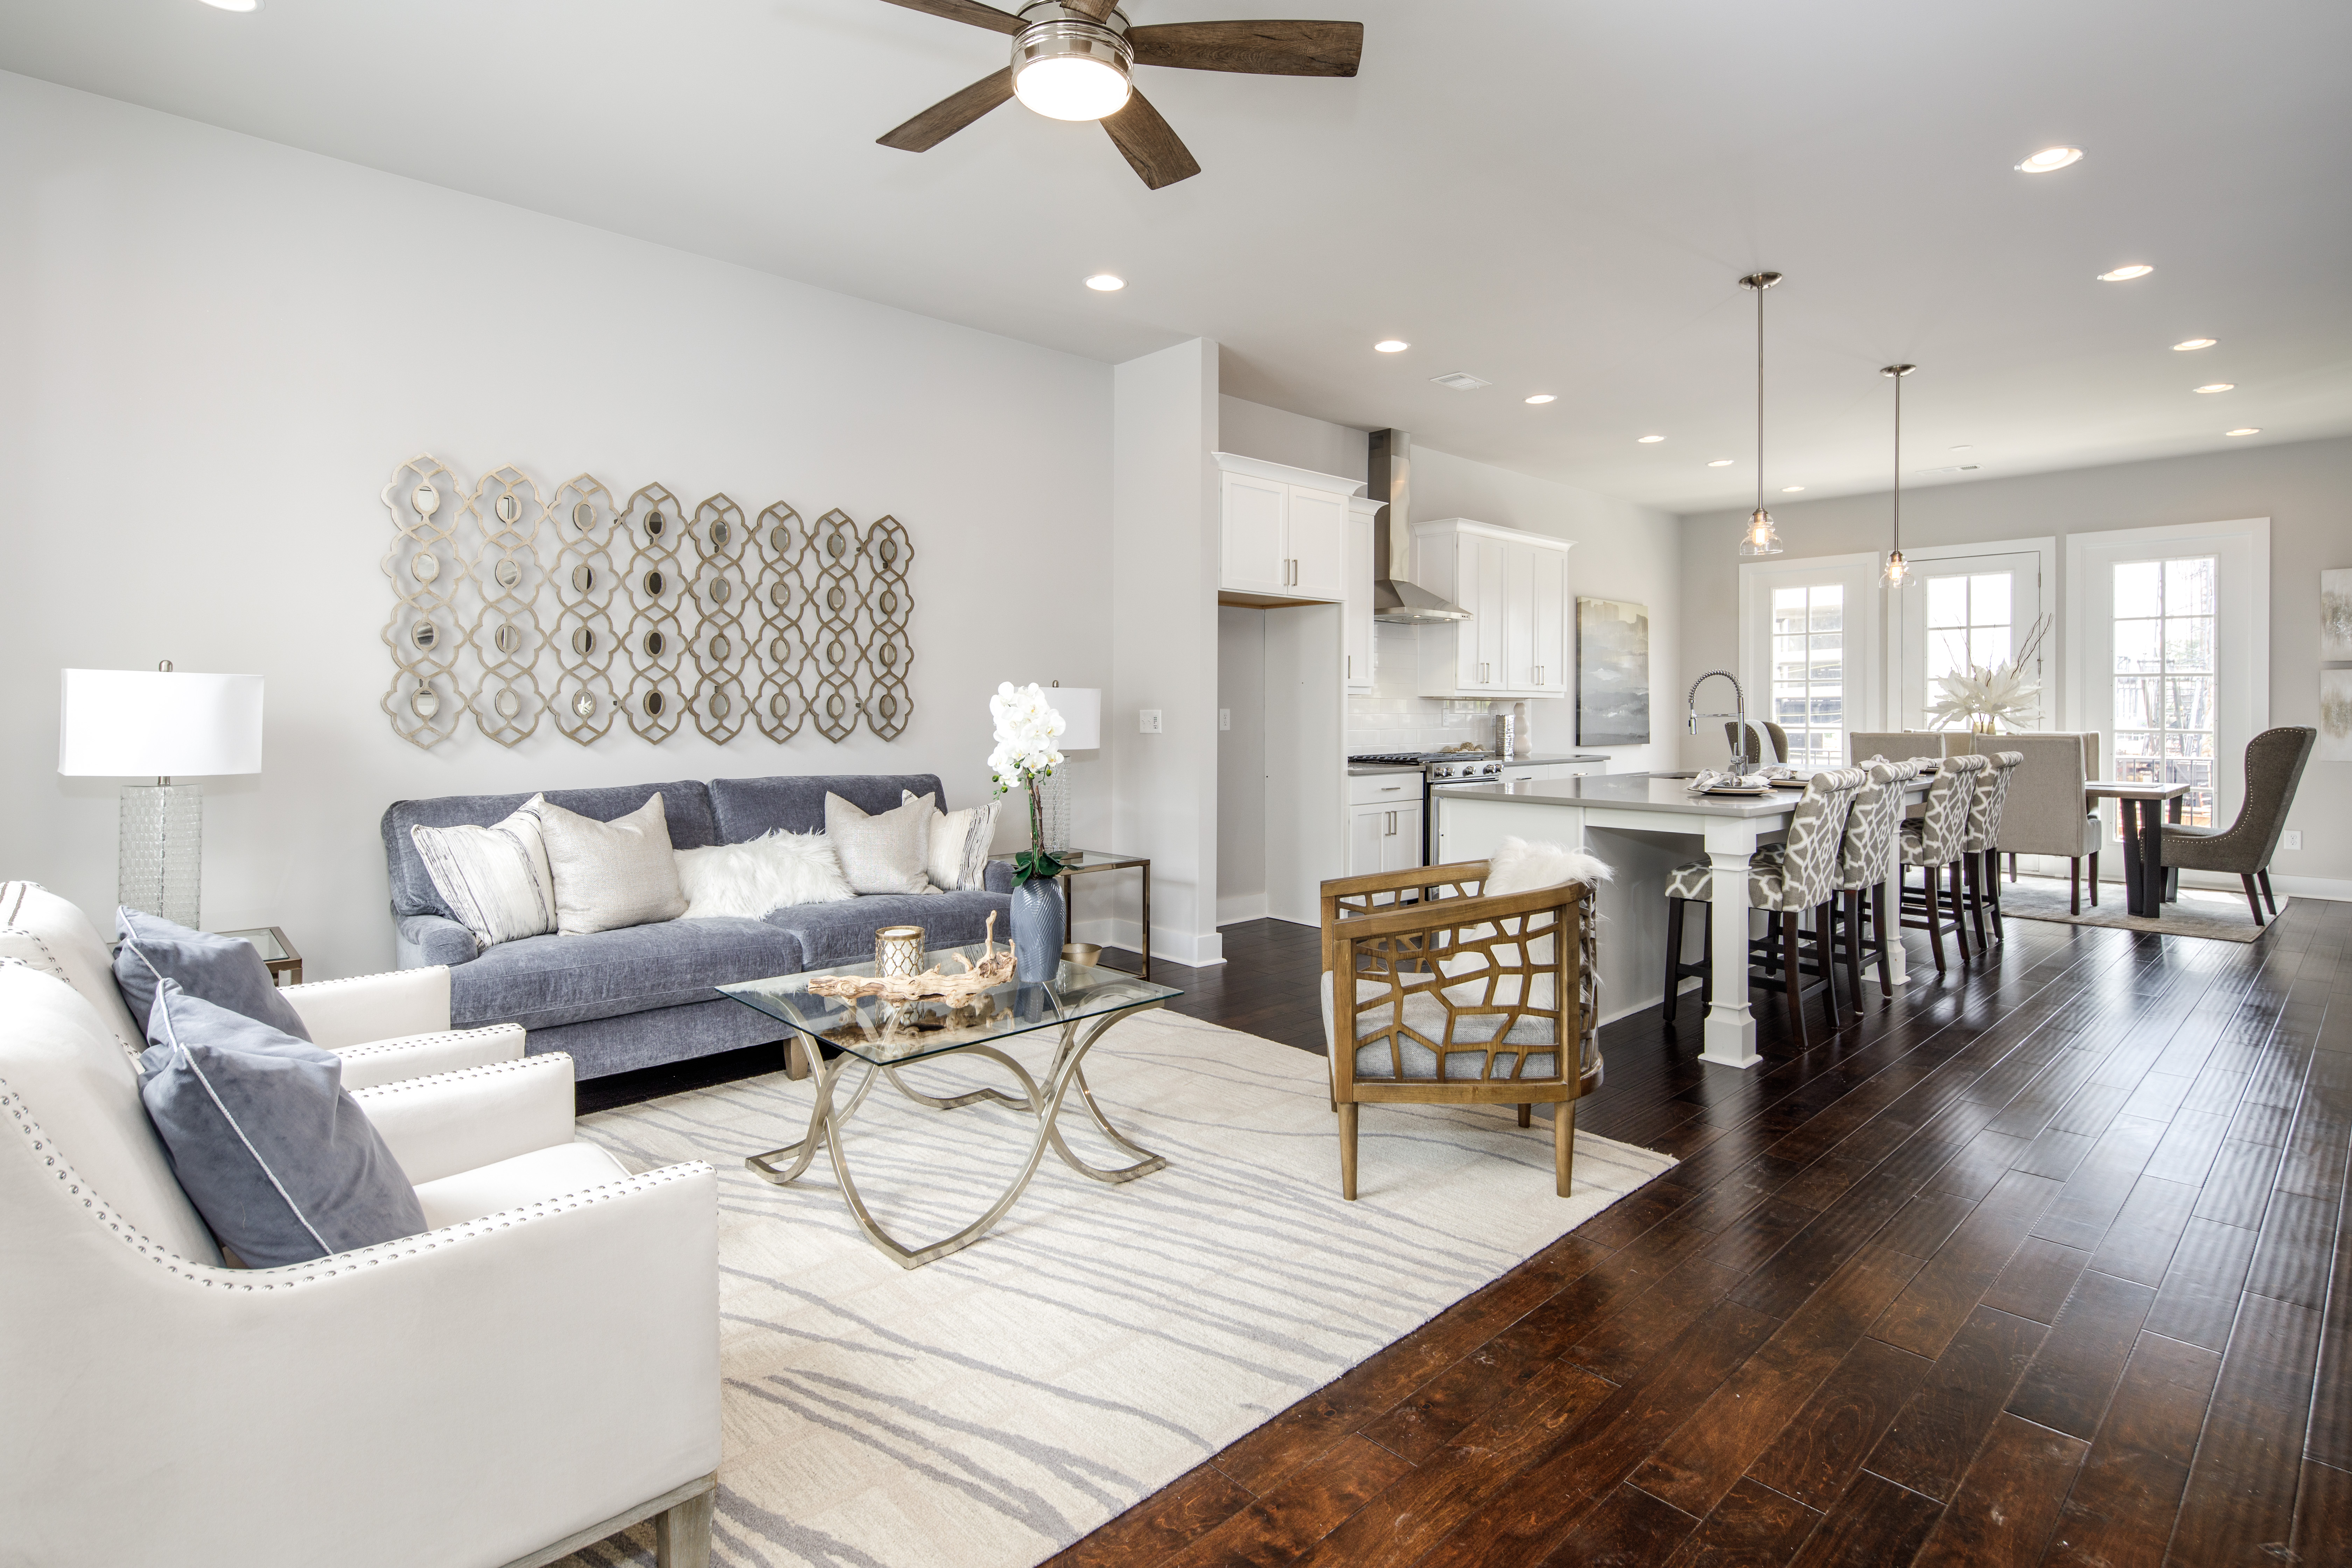 Tour our open concept townhomes during the Summer Move In Special